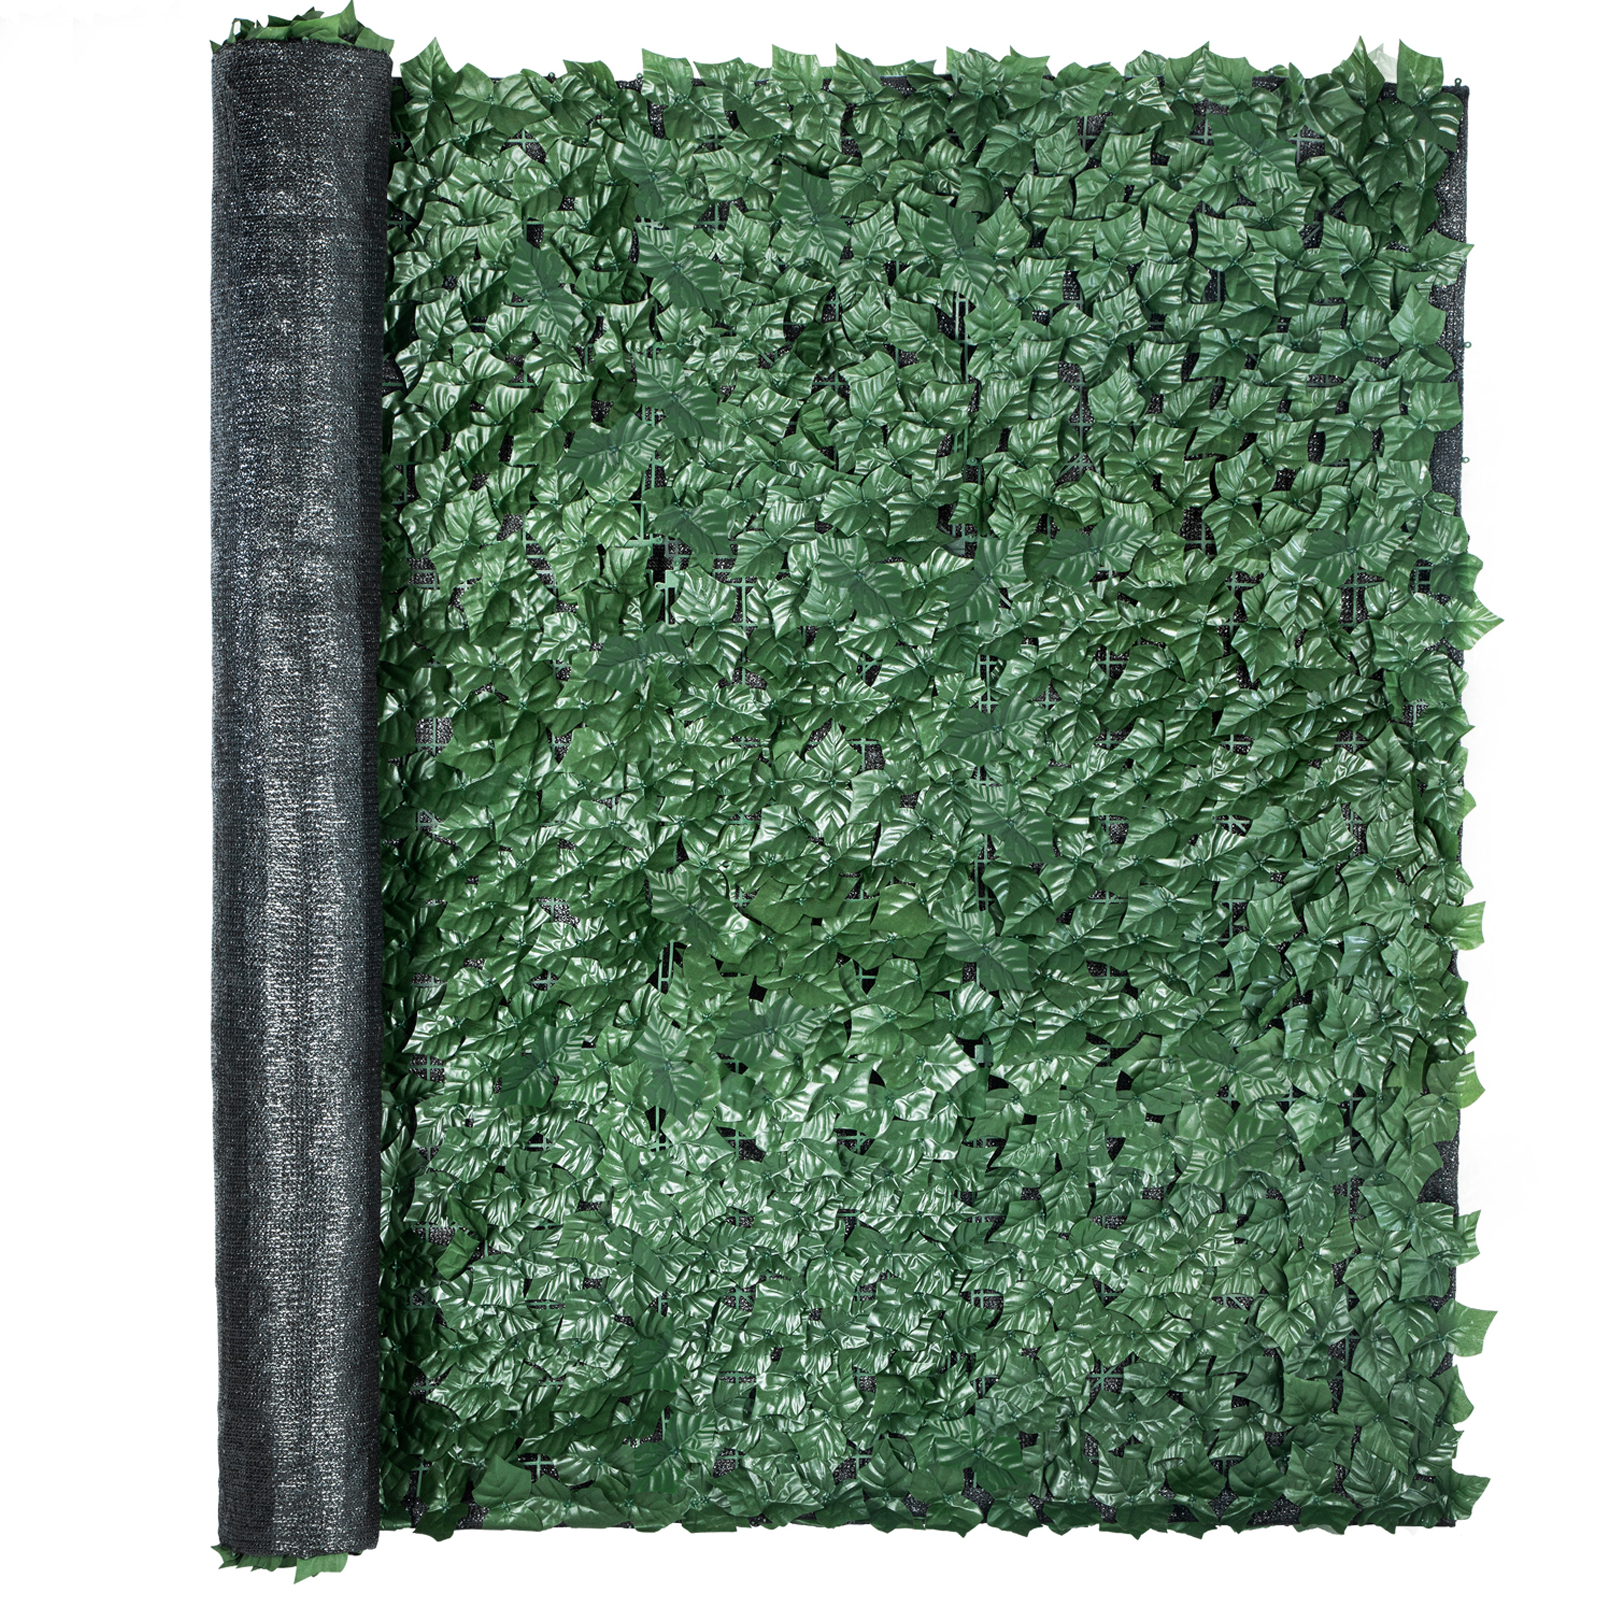 VEVOR 96"x72" Faux Ivy Leaf Artificial Hedge Privacy Fence Screen Decorative от Vevor Many GEOs